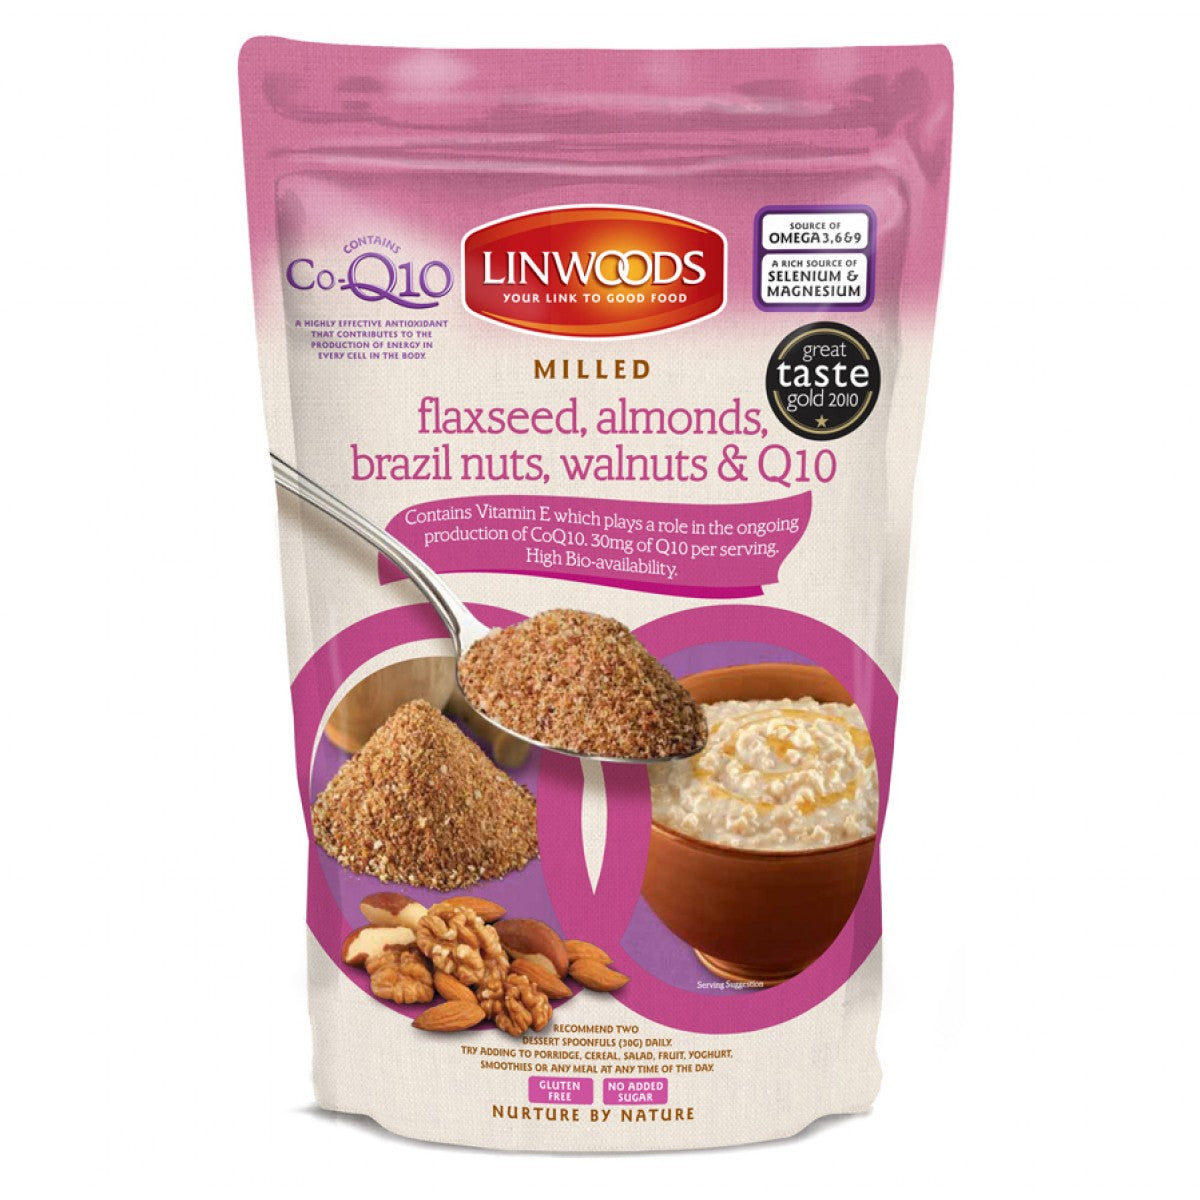 Linwoods Milled Flaxseed, Nuts & Q10 mix 360g - Just Natural